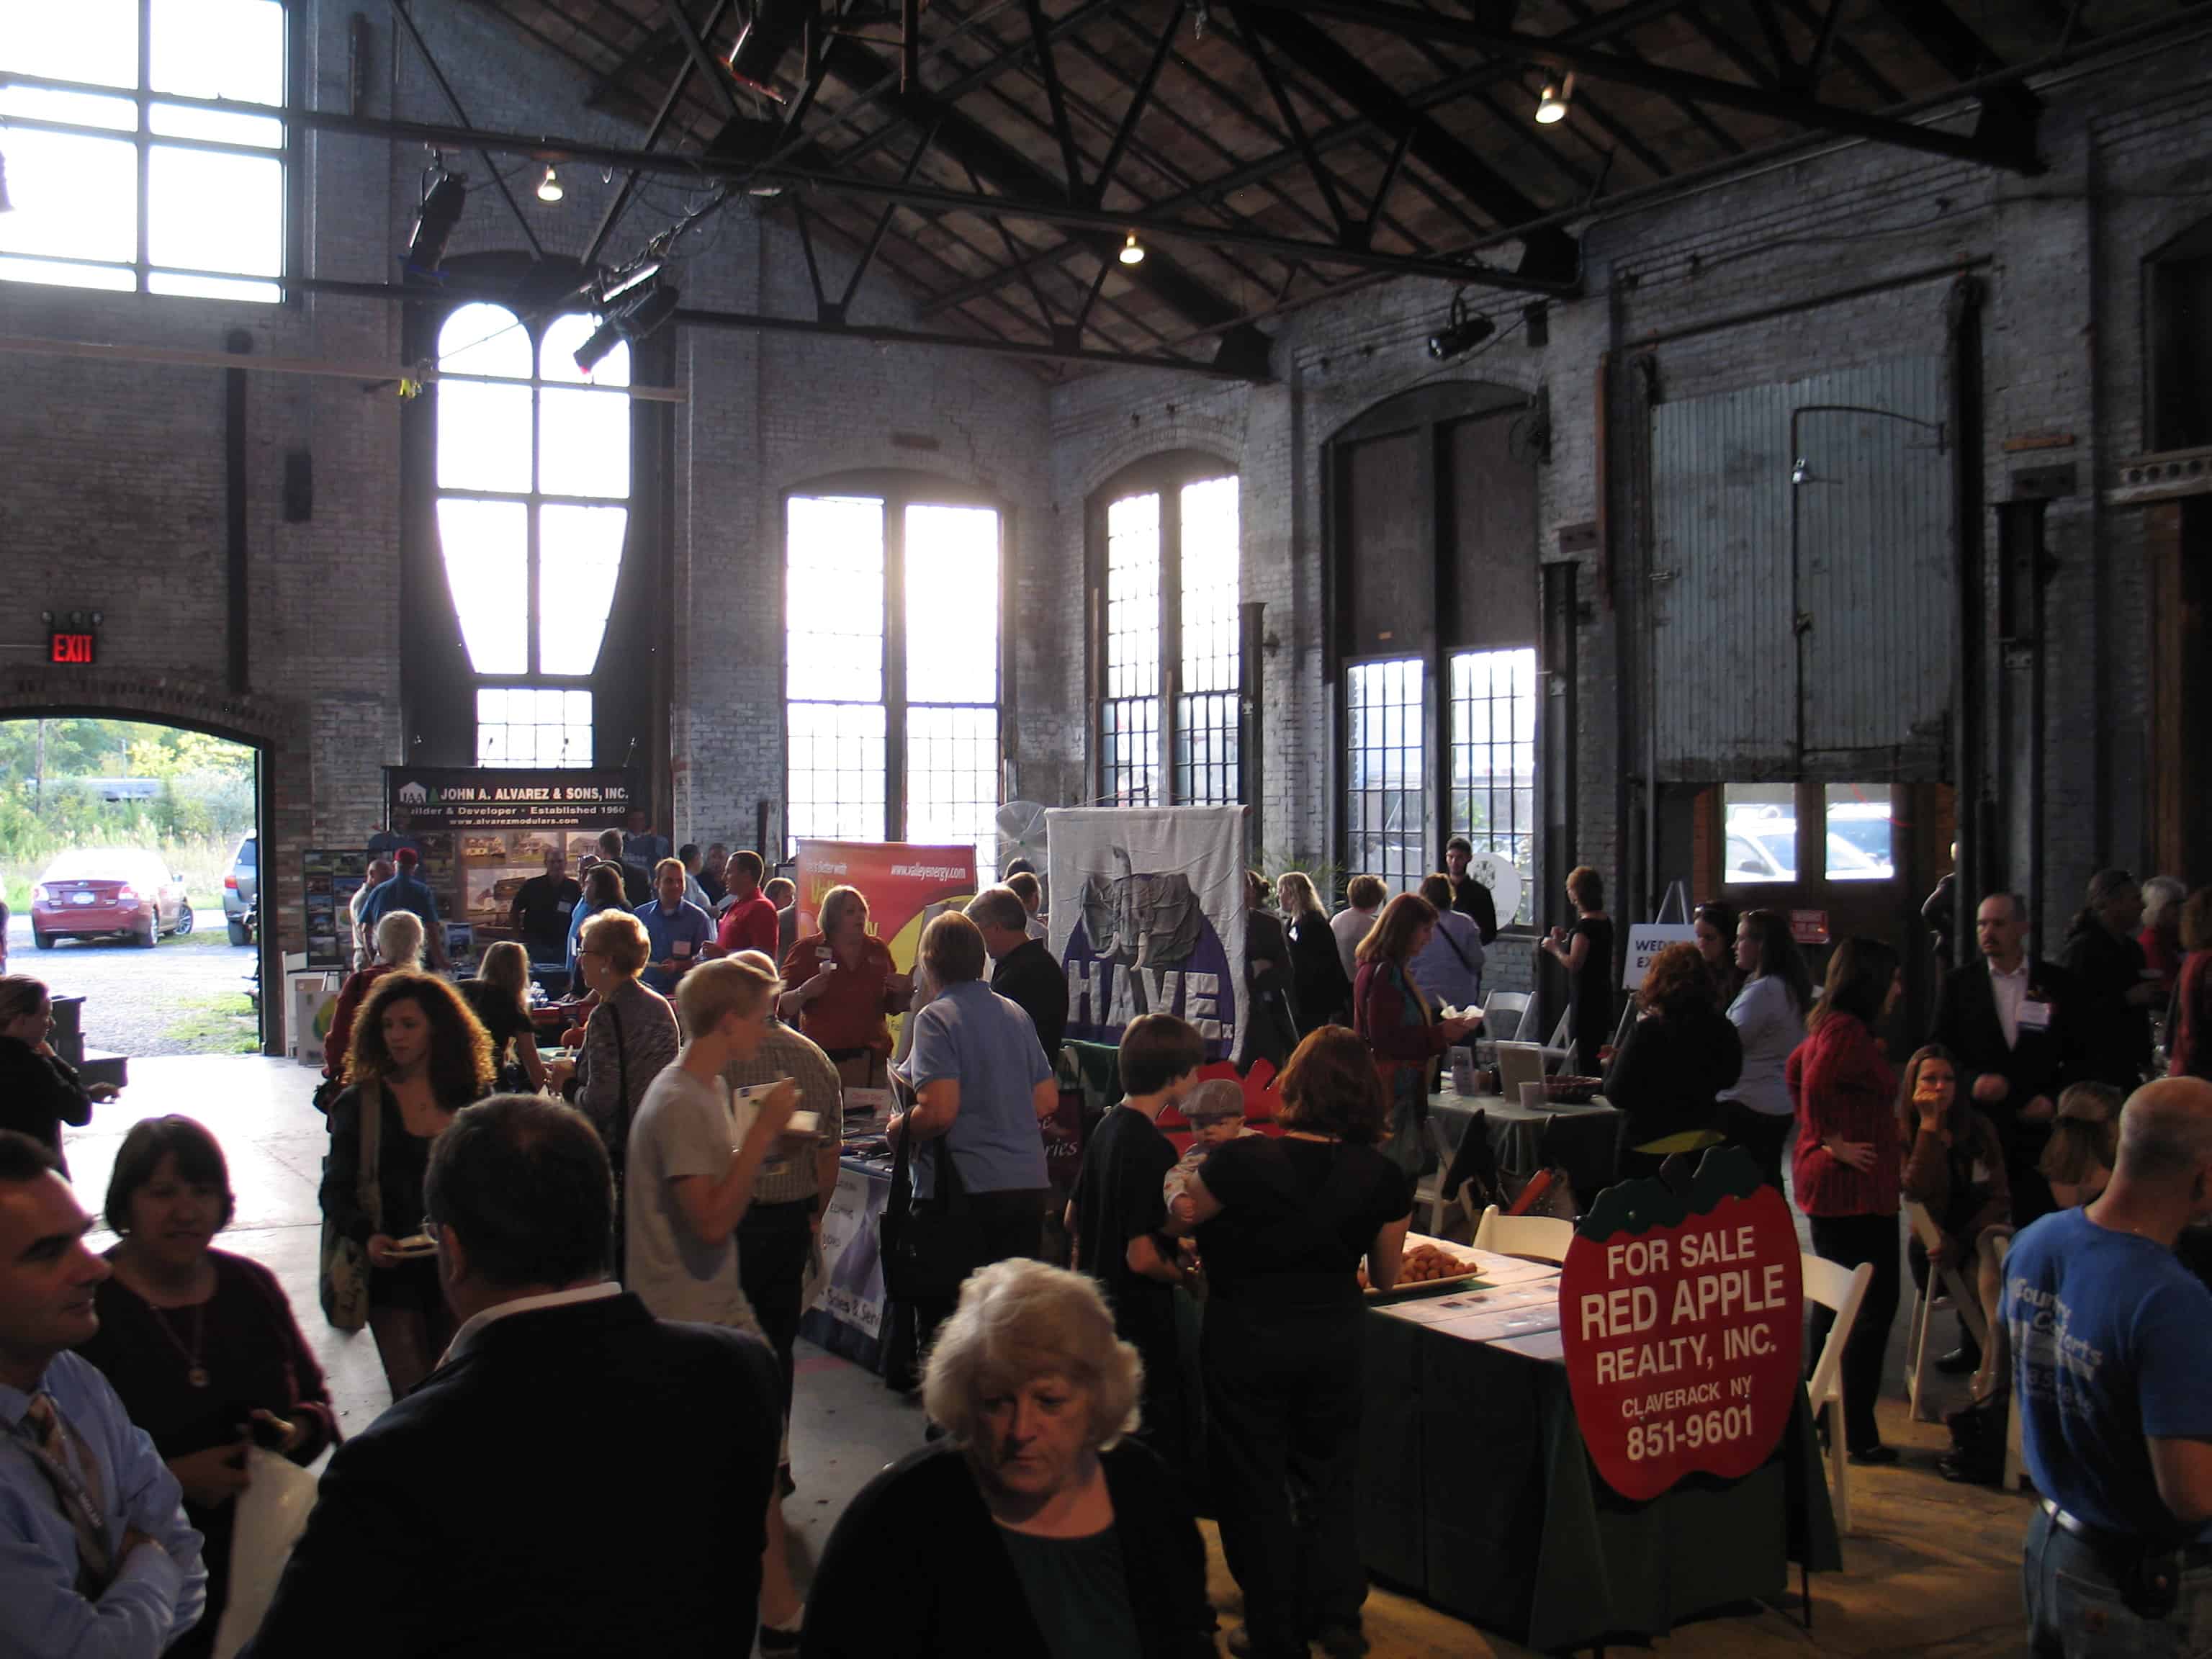 Thank You to all who attended our Buy Local Business Expo!